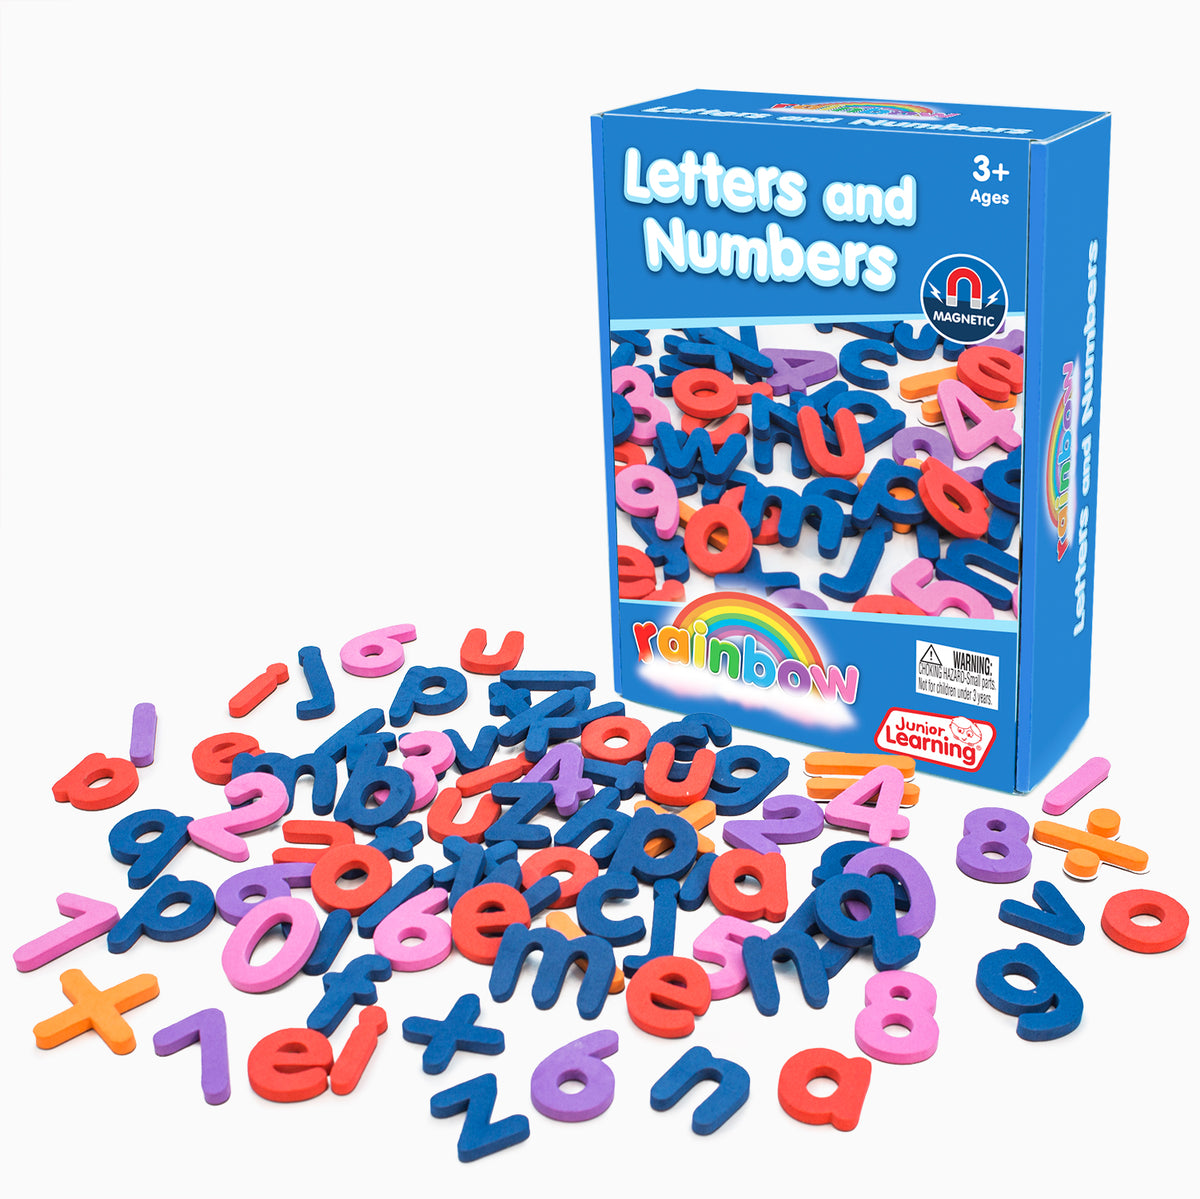 Rainbow Letters and Numbers